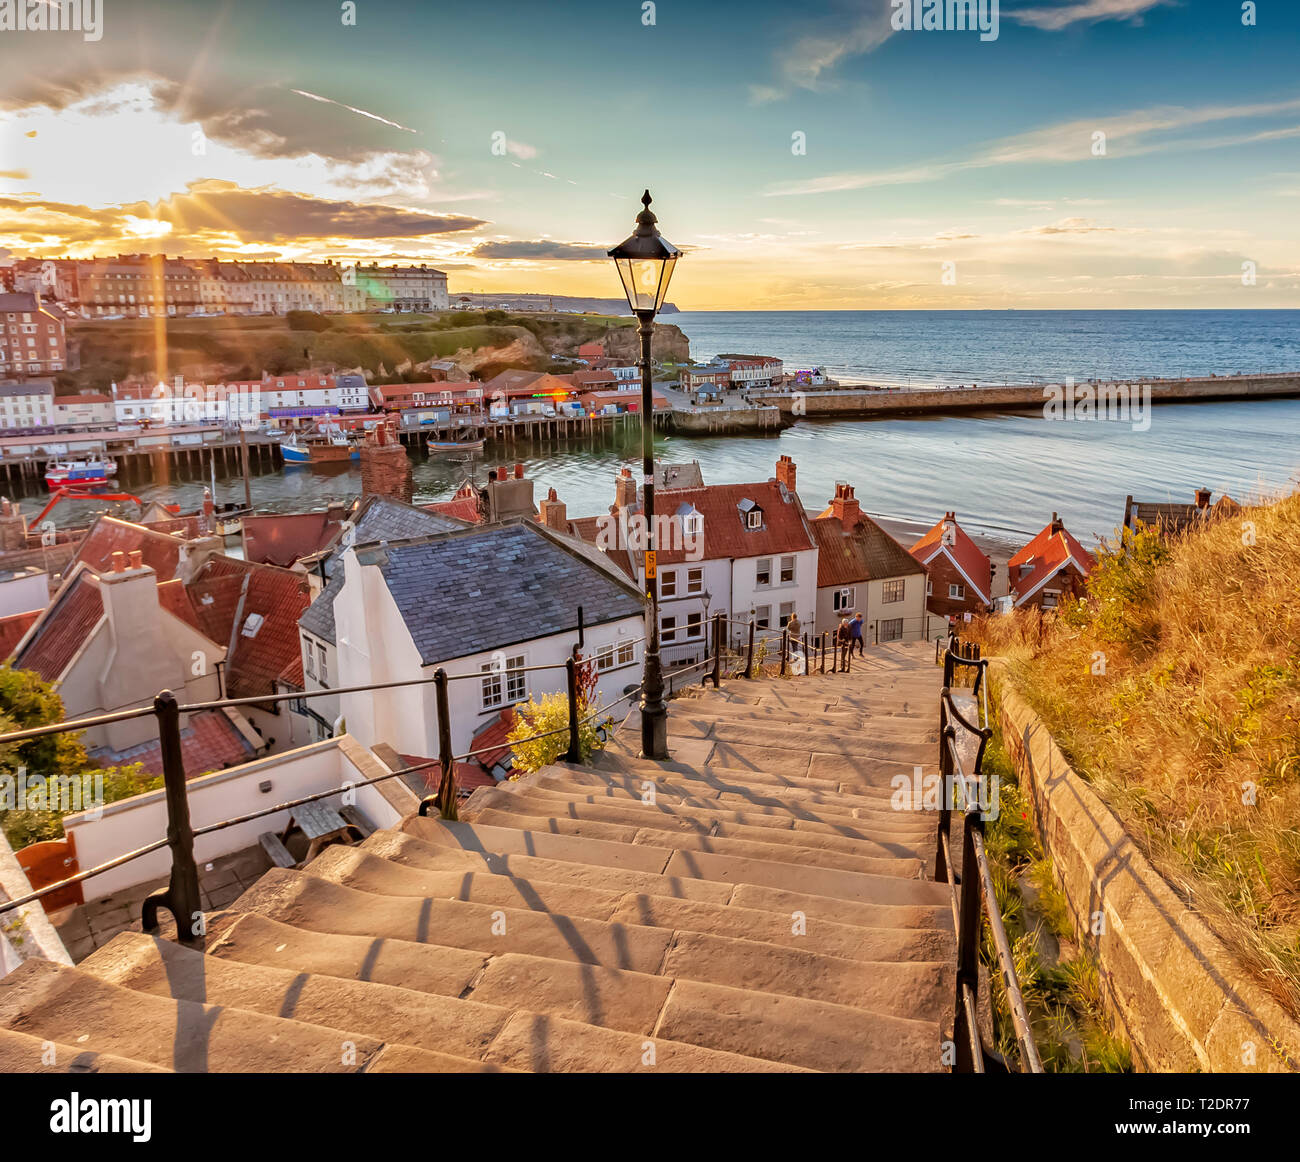 Sunset over the 199 steps at Whitby, North Yorkshire coast, England Stock Photo